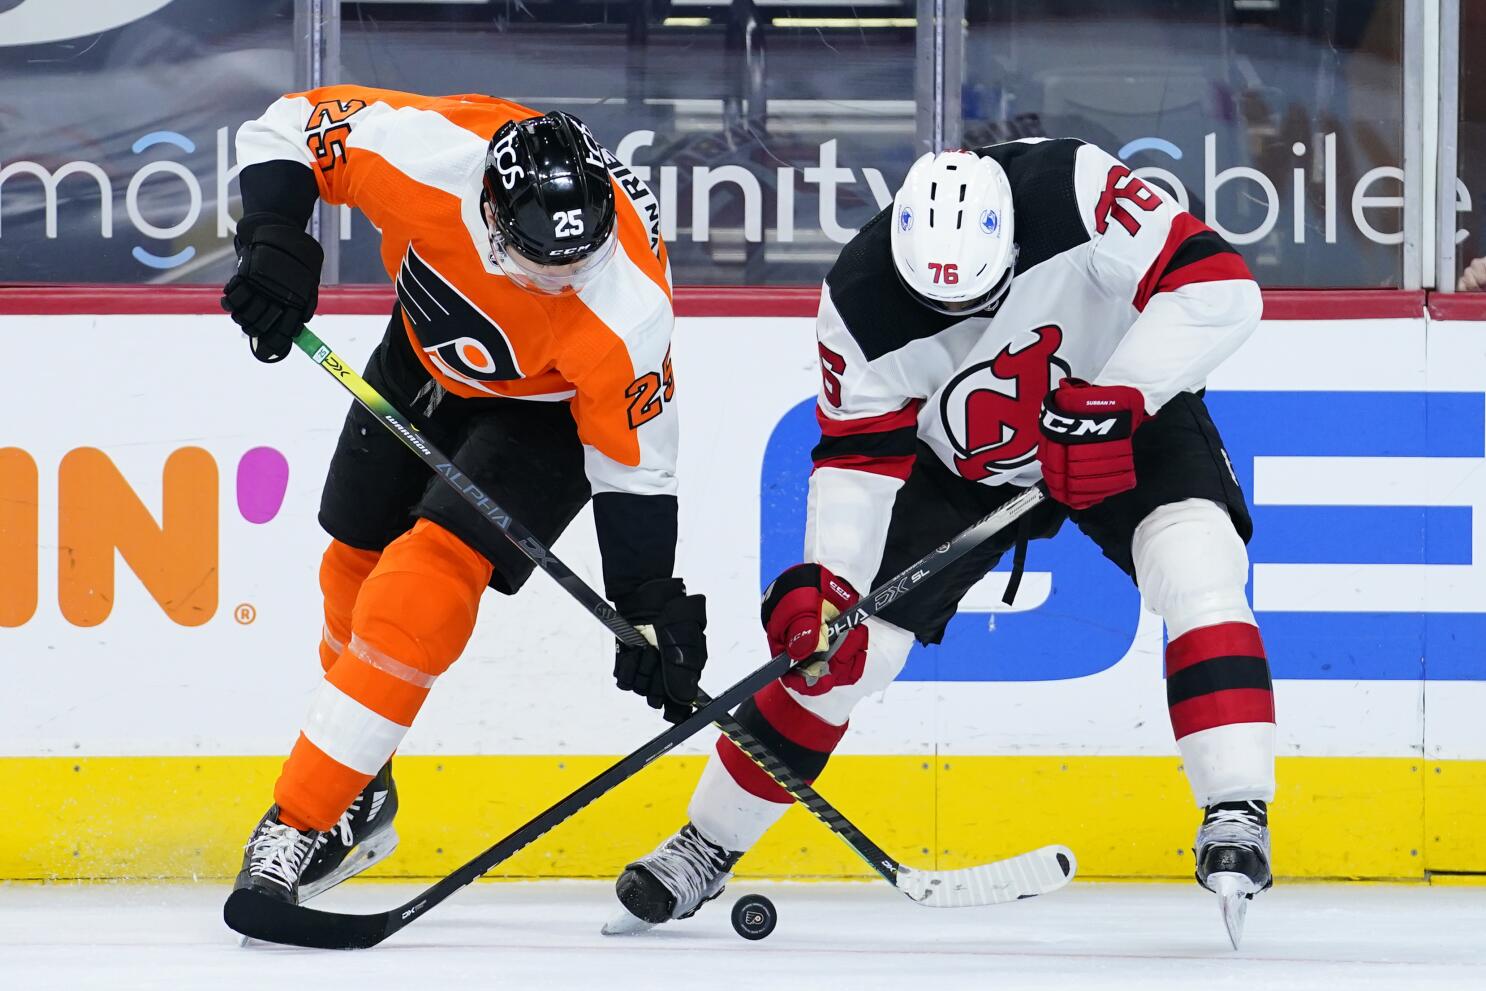 McLeod, Palmieri score in New Jersey's 4-3 win over Flyers - The